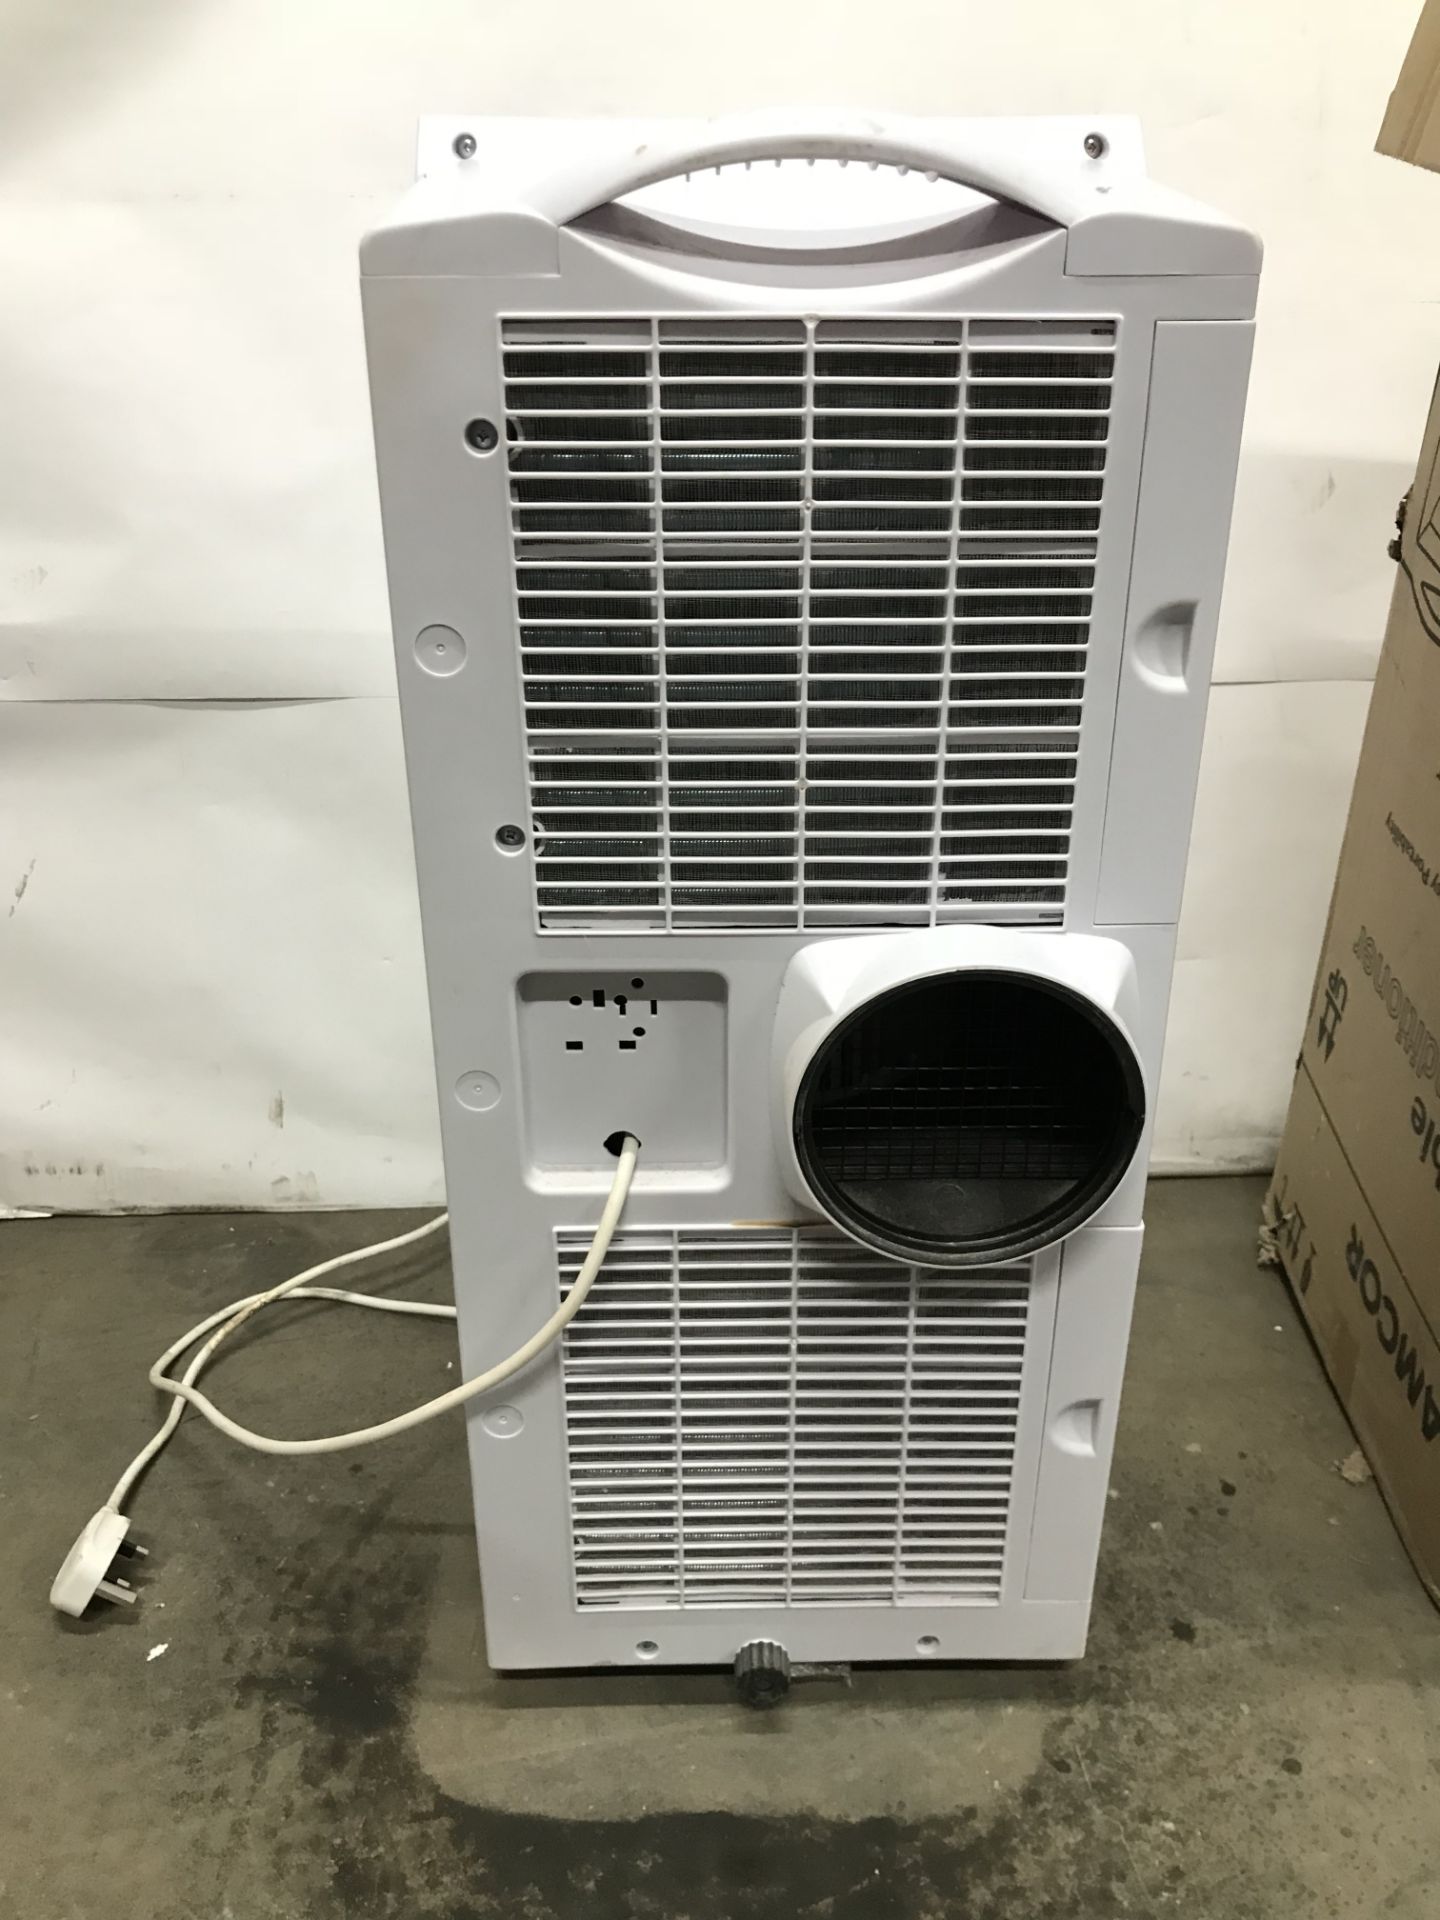 3 x Amcor SF10000E Portable Air Conditioning Units - Image 6 of 7